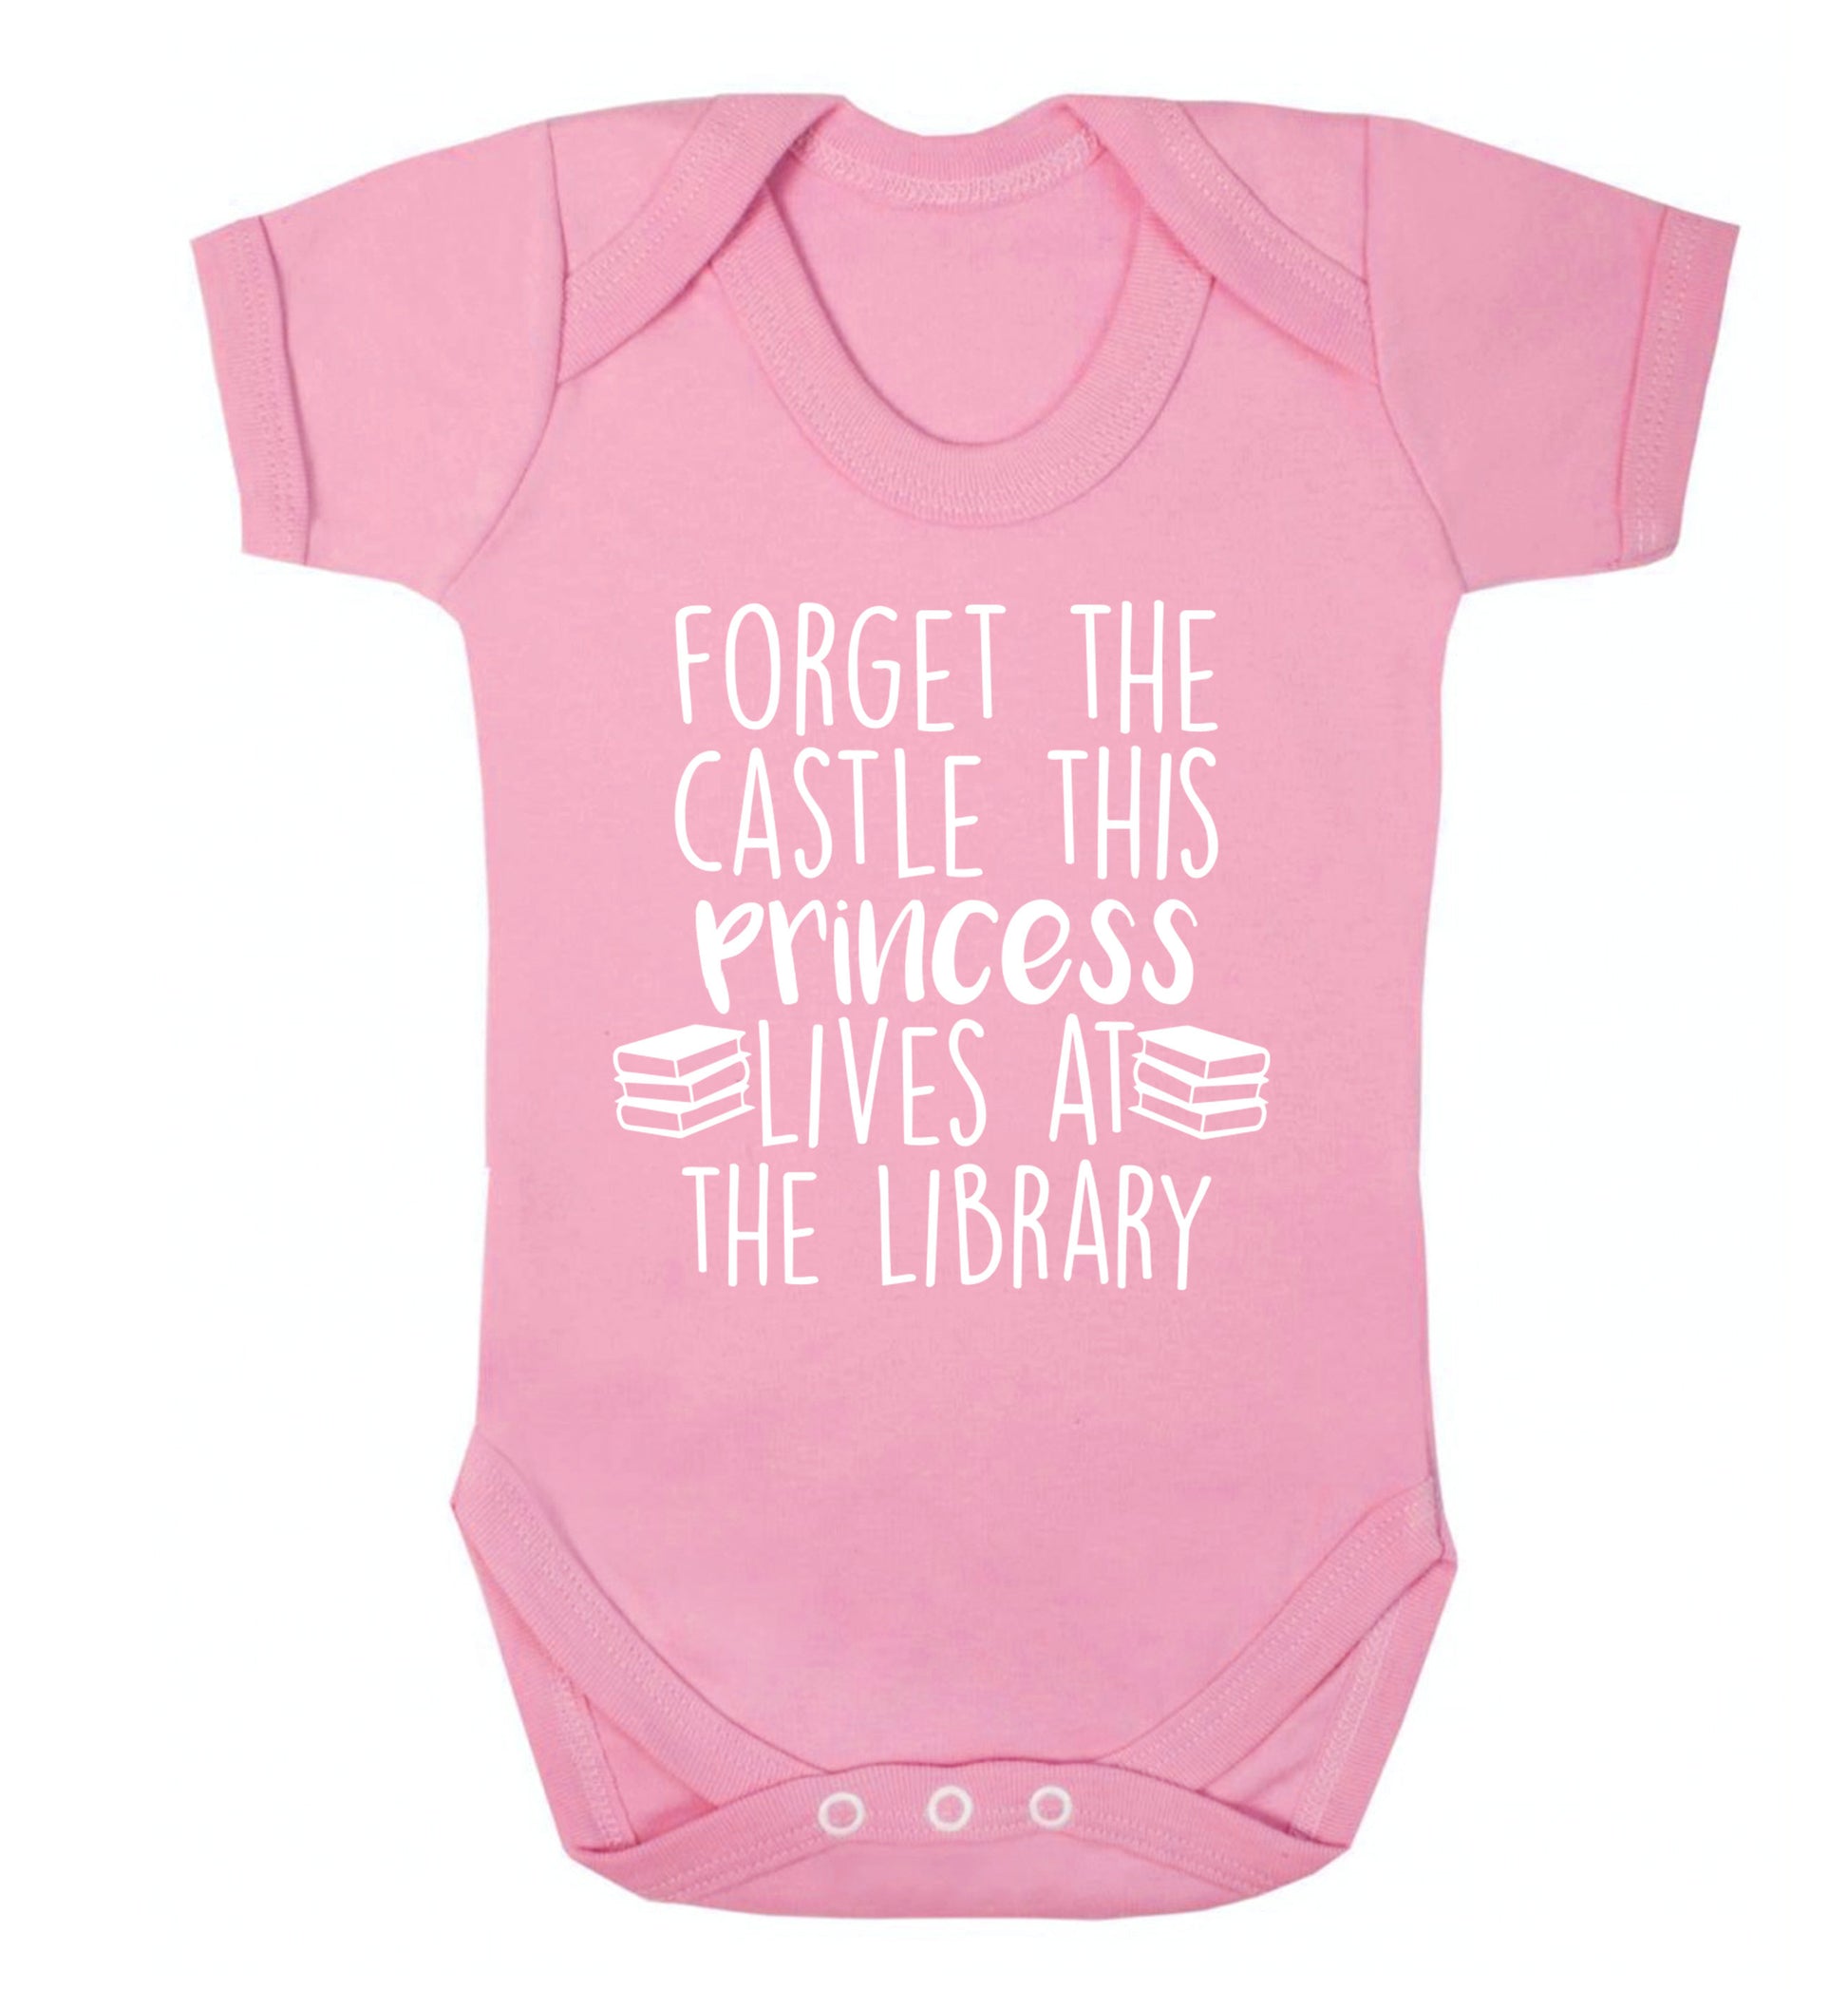 Forget the castle this princess lives at the library Baby Vest pale pink 18-24 months